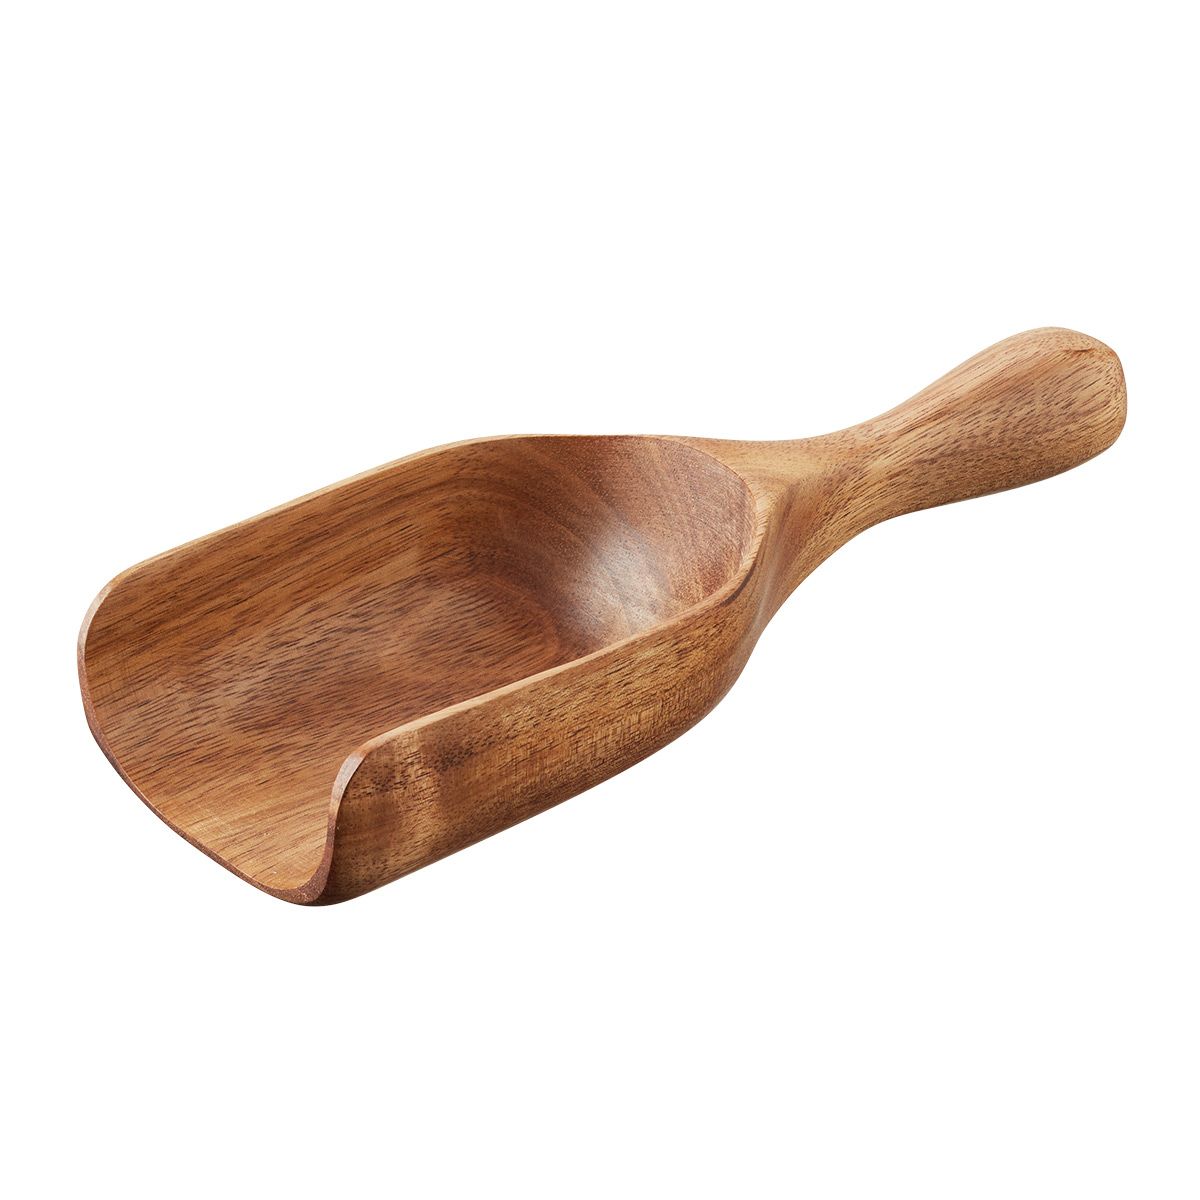 The Container Store Wooden Scoops | The Container Store